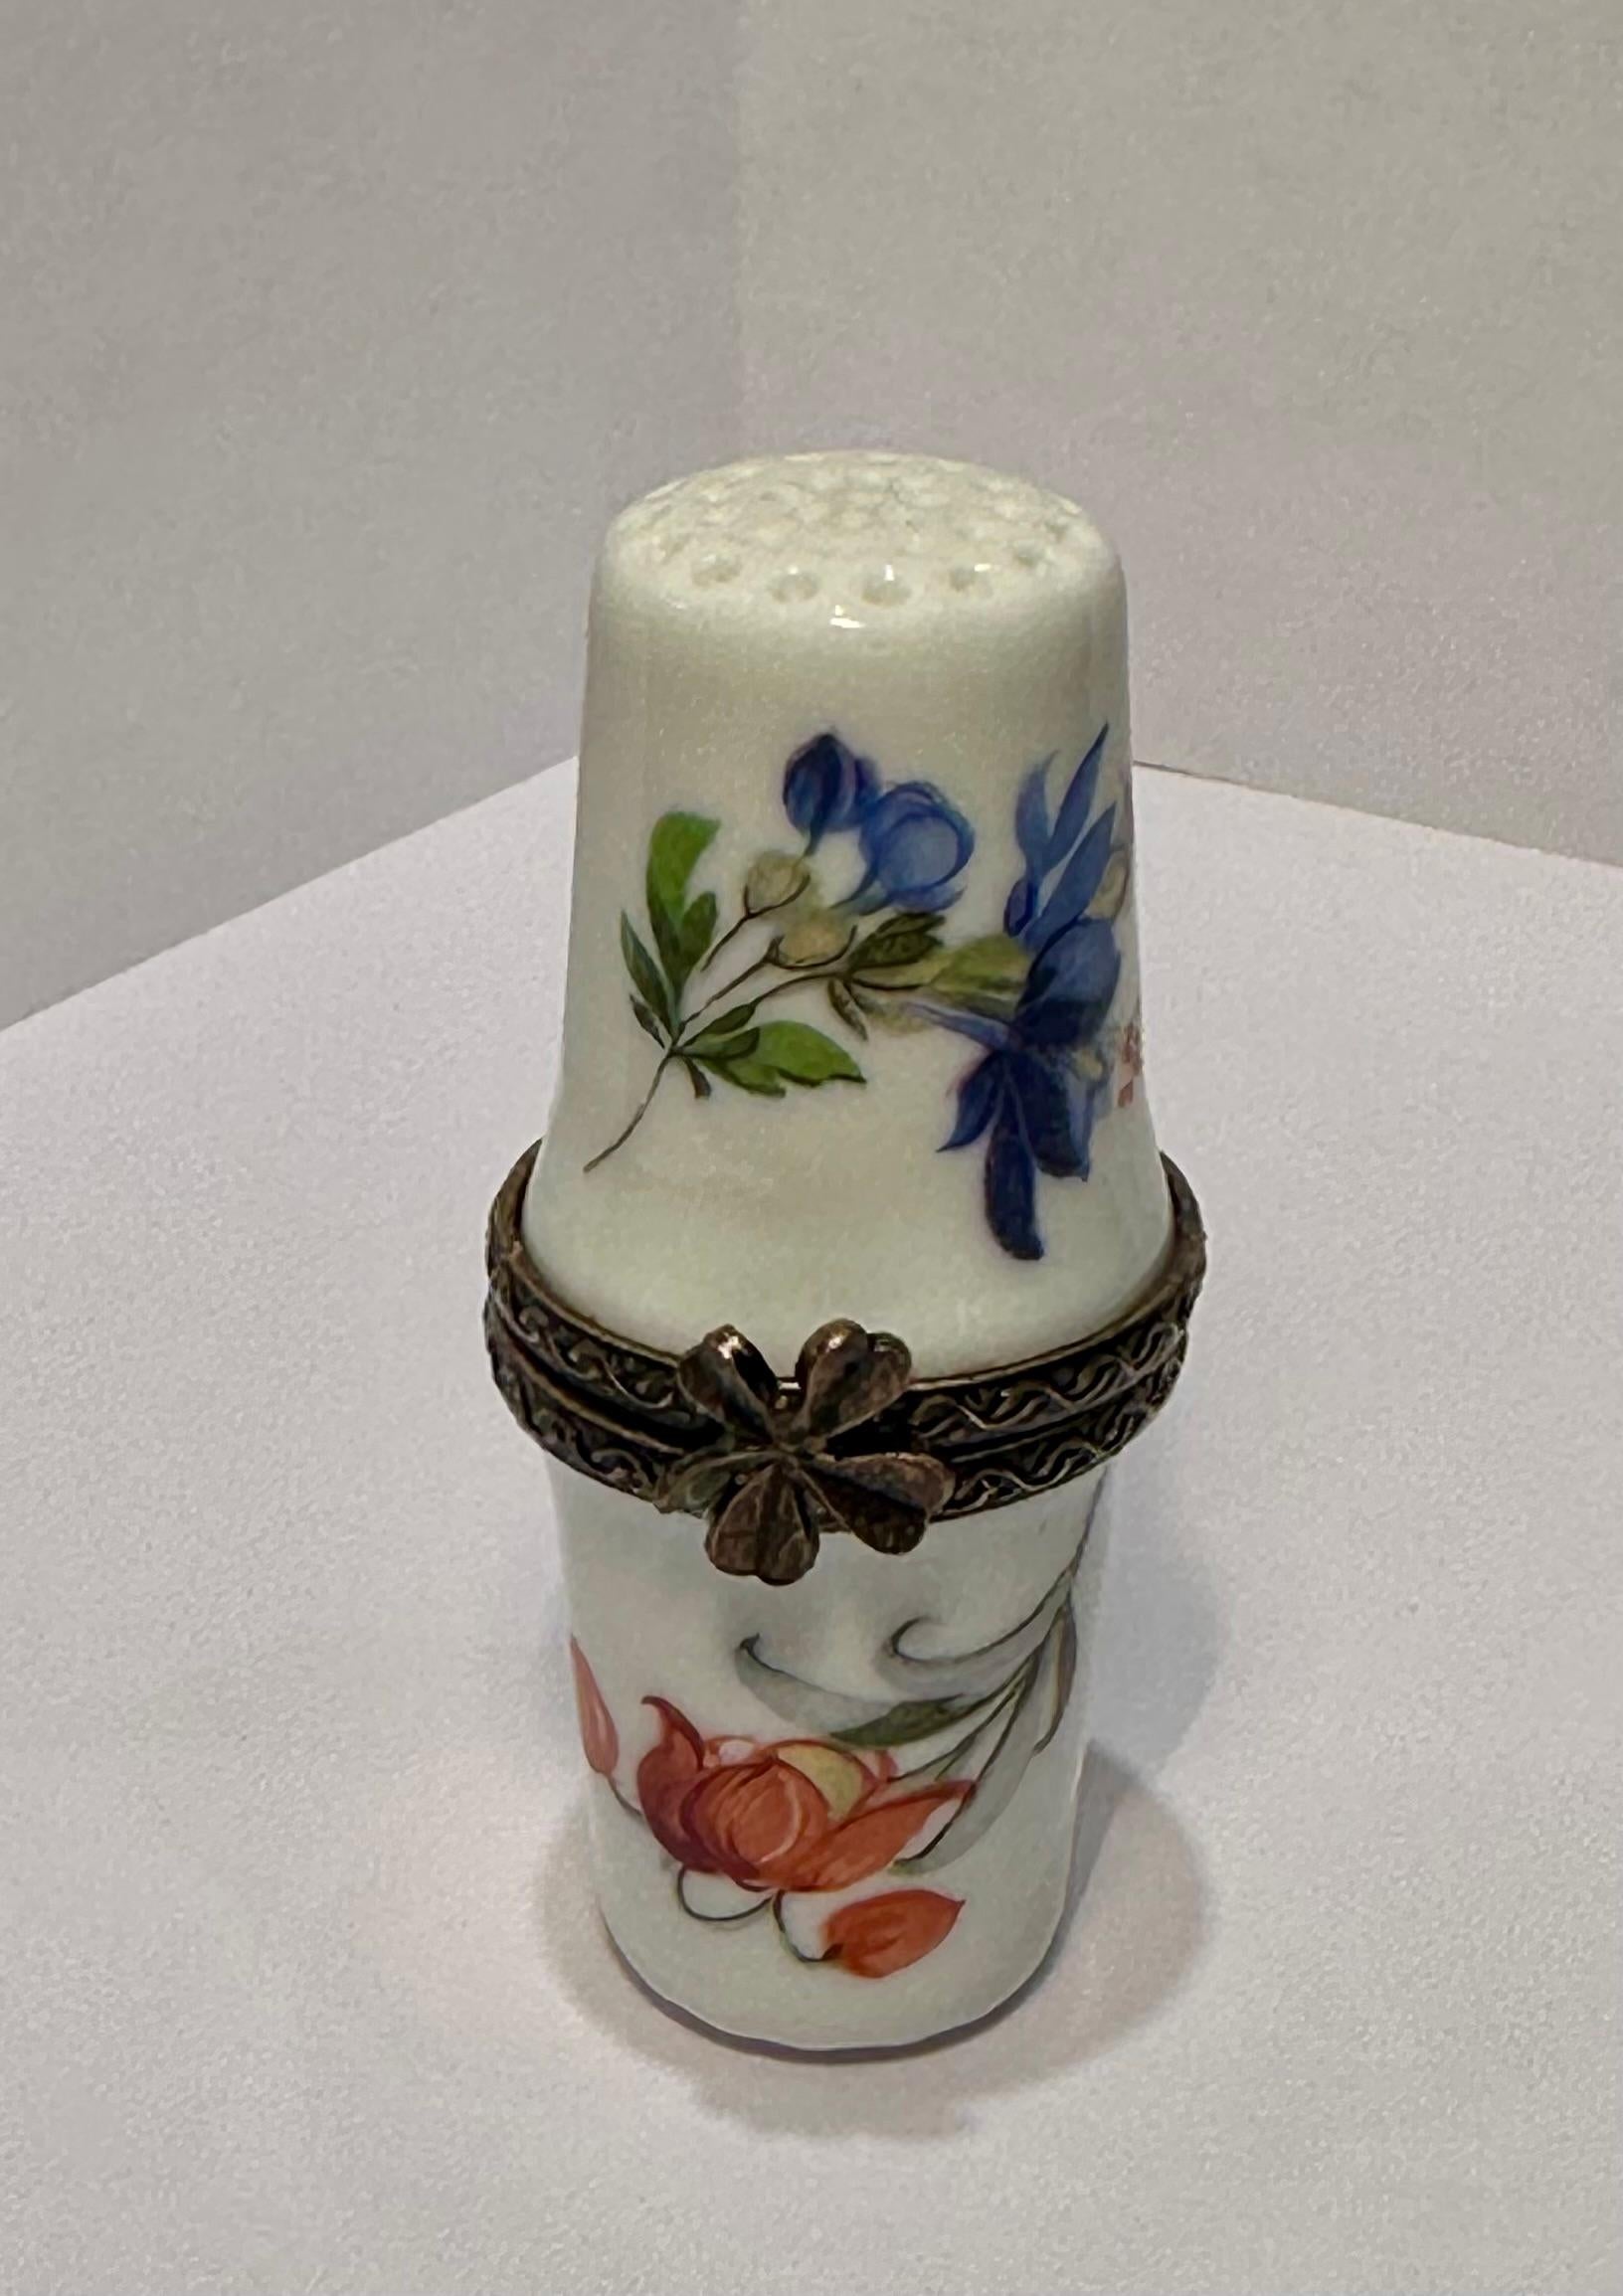 Very pretty, Limoges porcelain double thimble shaped trinket box is handmade with a white background and features pretty multi-colored flowers surrounding each side of the double thimble shaped box. This sewing themed box could also be used to hold